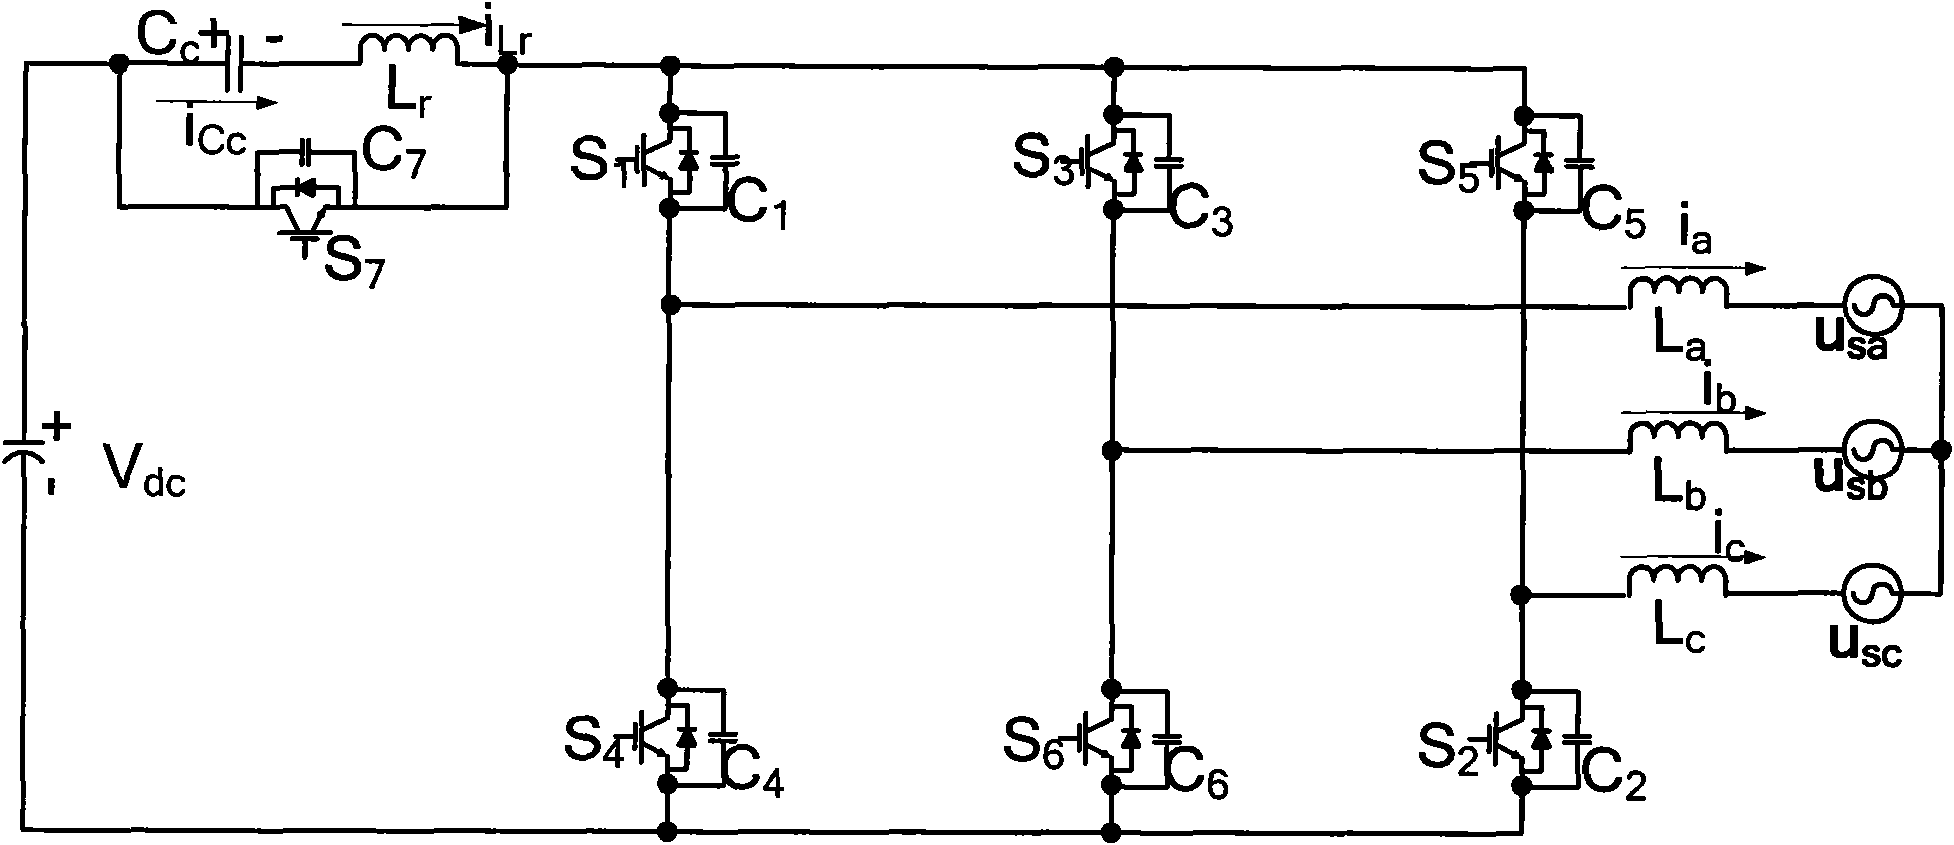 Minimum-voltage, active-clamp and three-phase grid-connected inverter